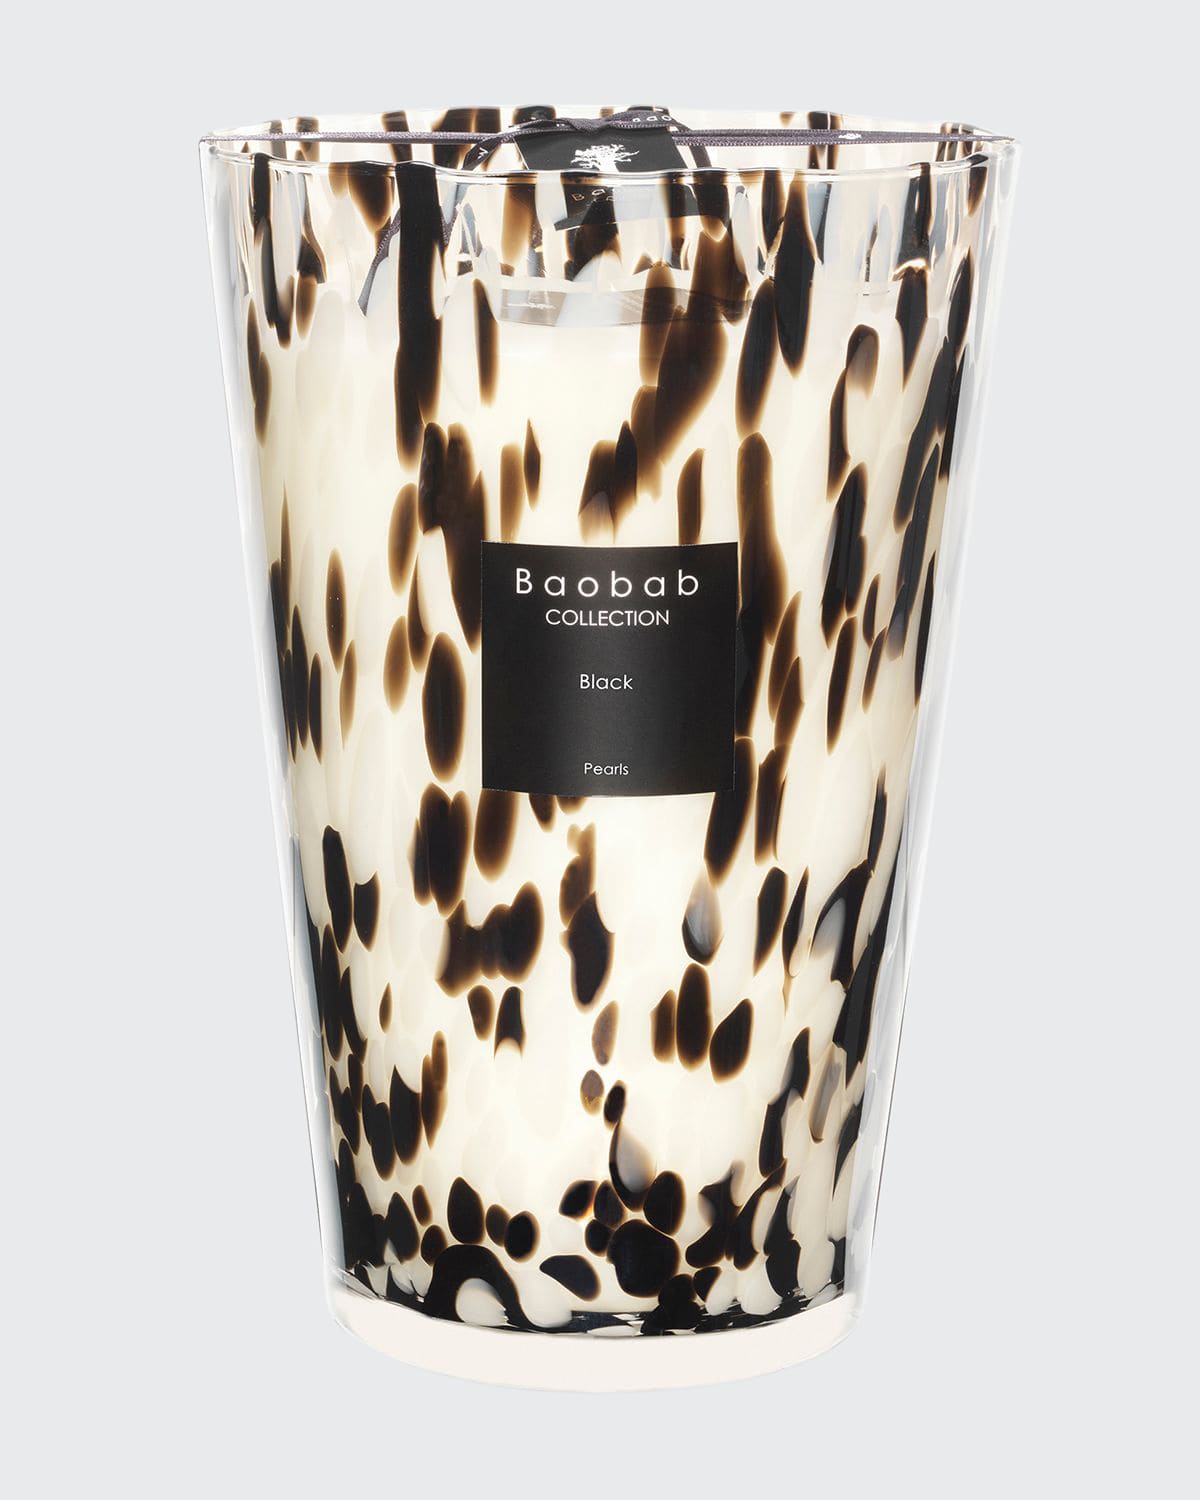 Baobab Collection Black Pearls Scented Candle, 13.8" In Black/white